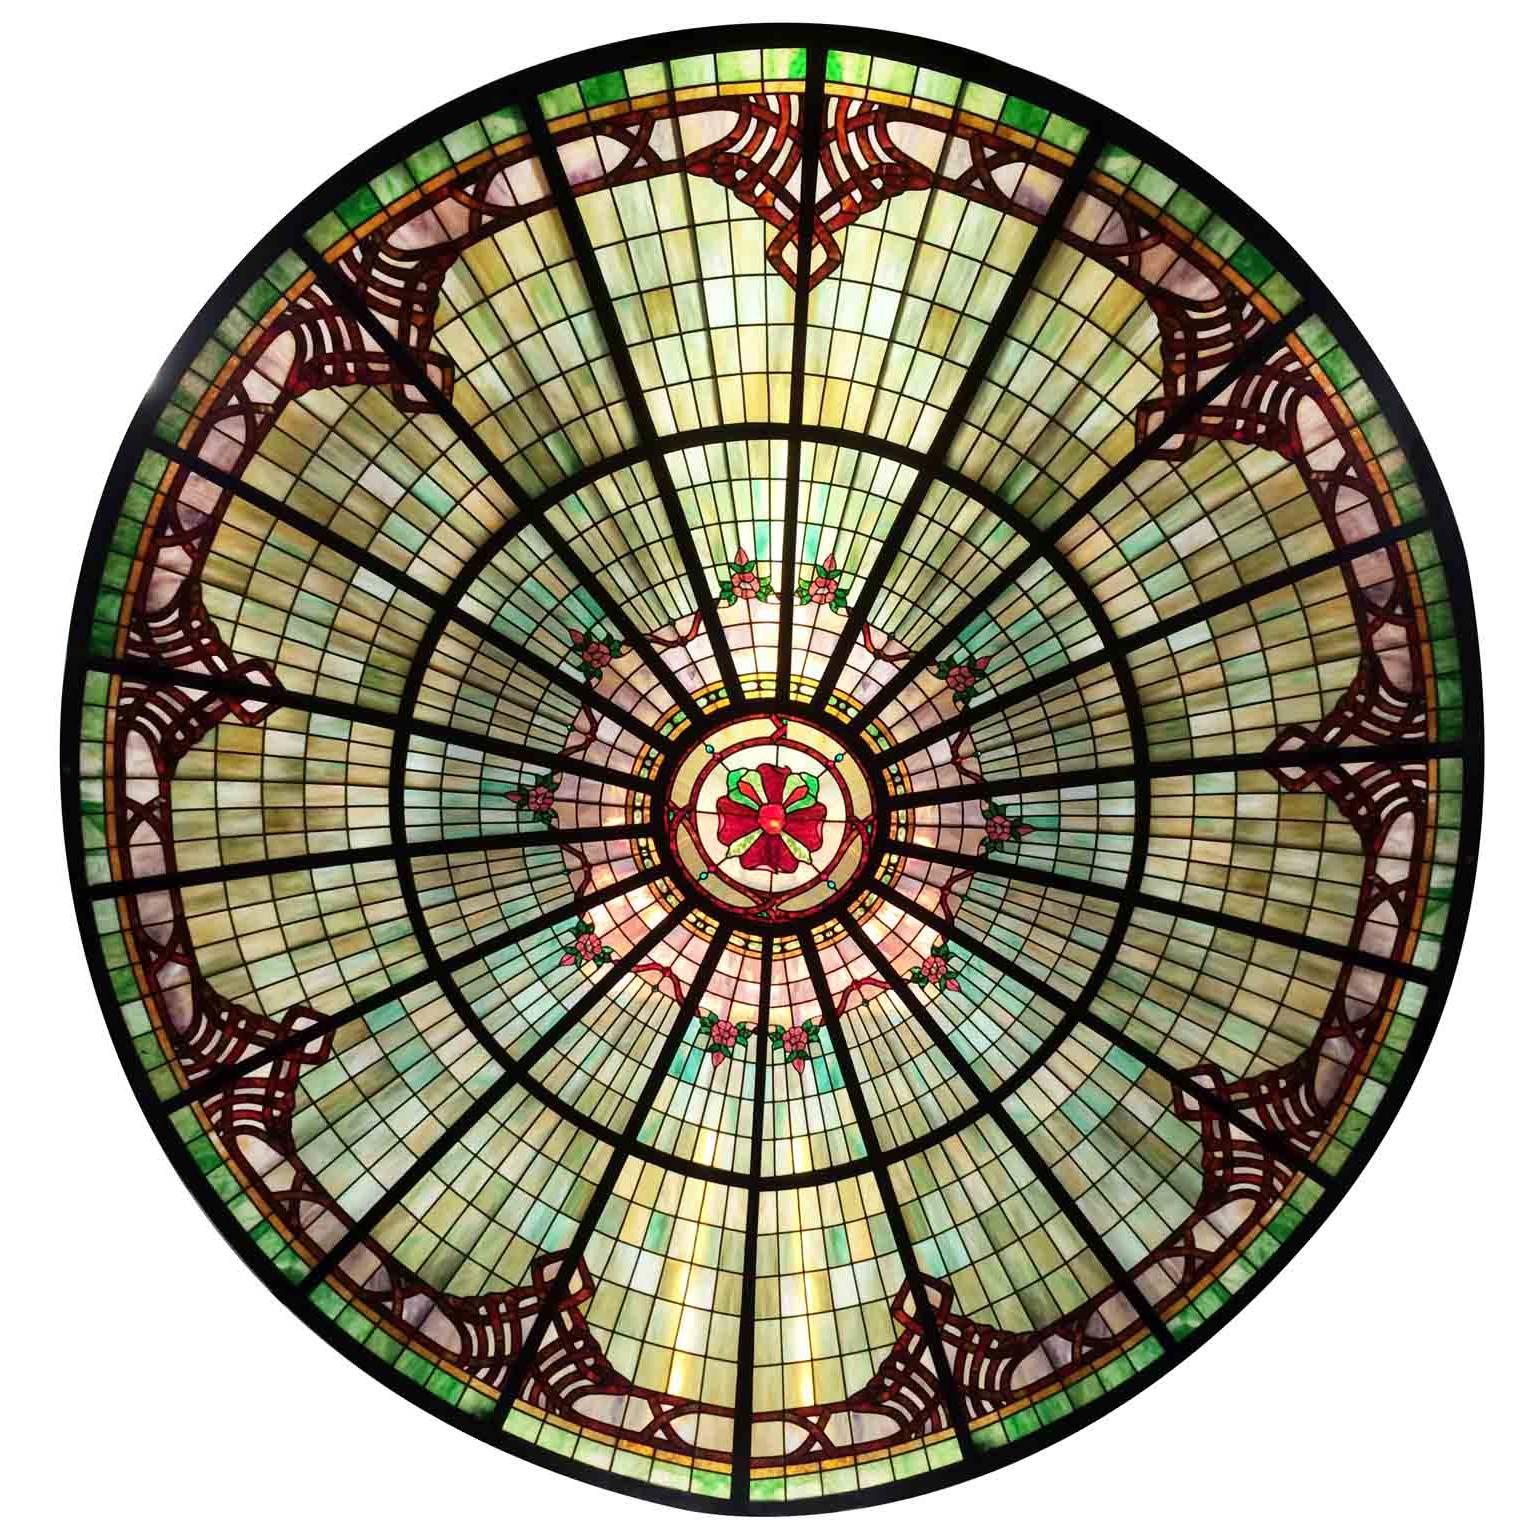 Wild Rose Stained Glass Ceiling Dome